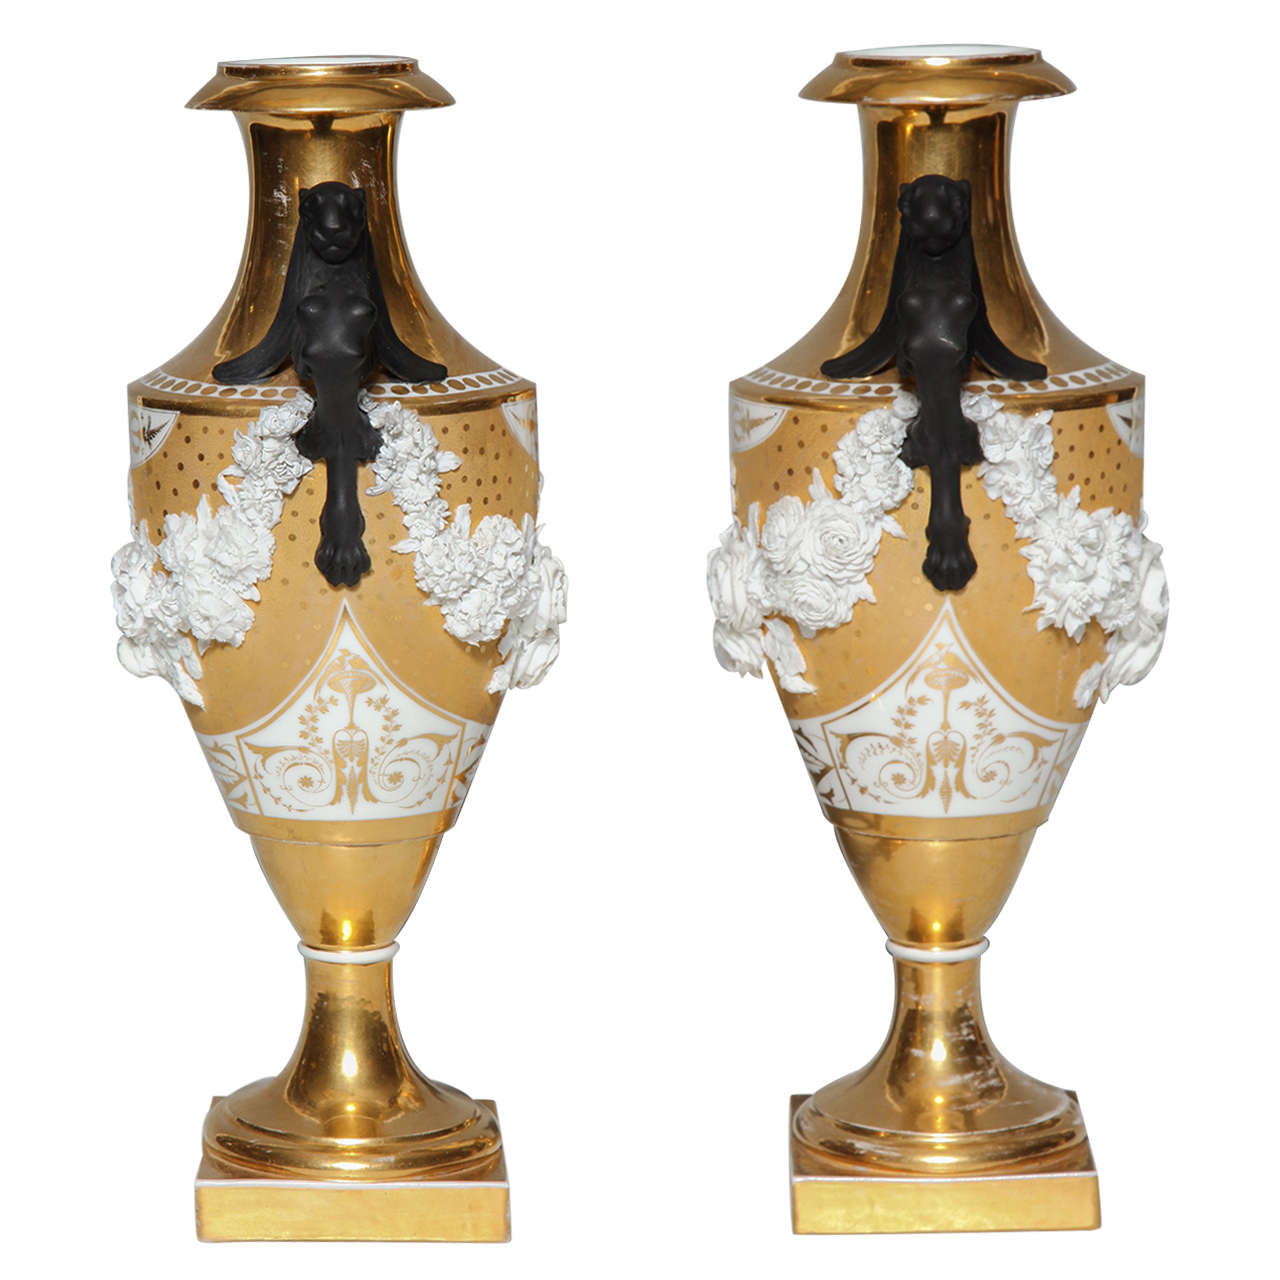 Rare Pair of Neoclassical Porcelain Vases, Possibly Russian, Early 1800s